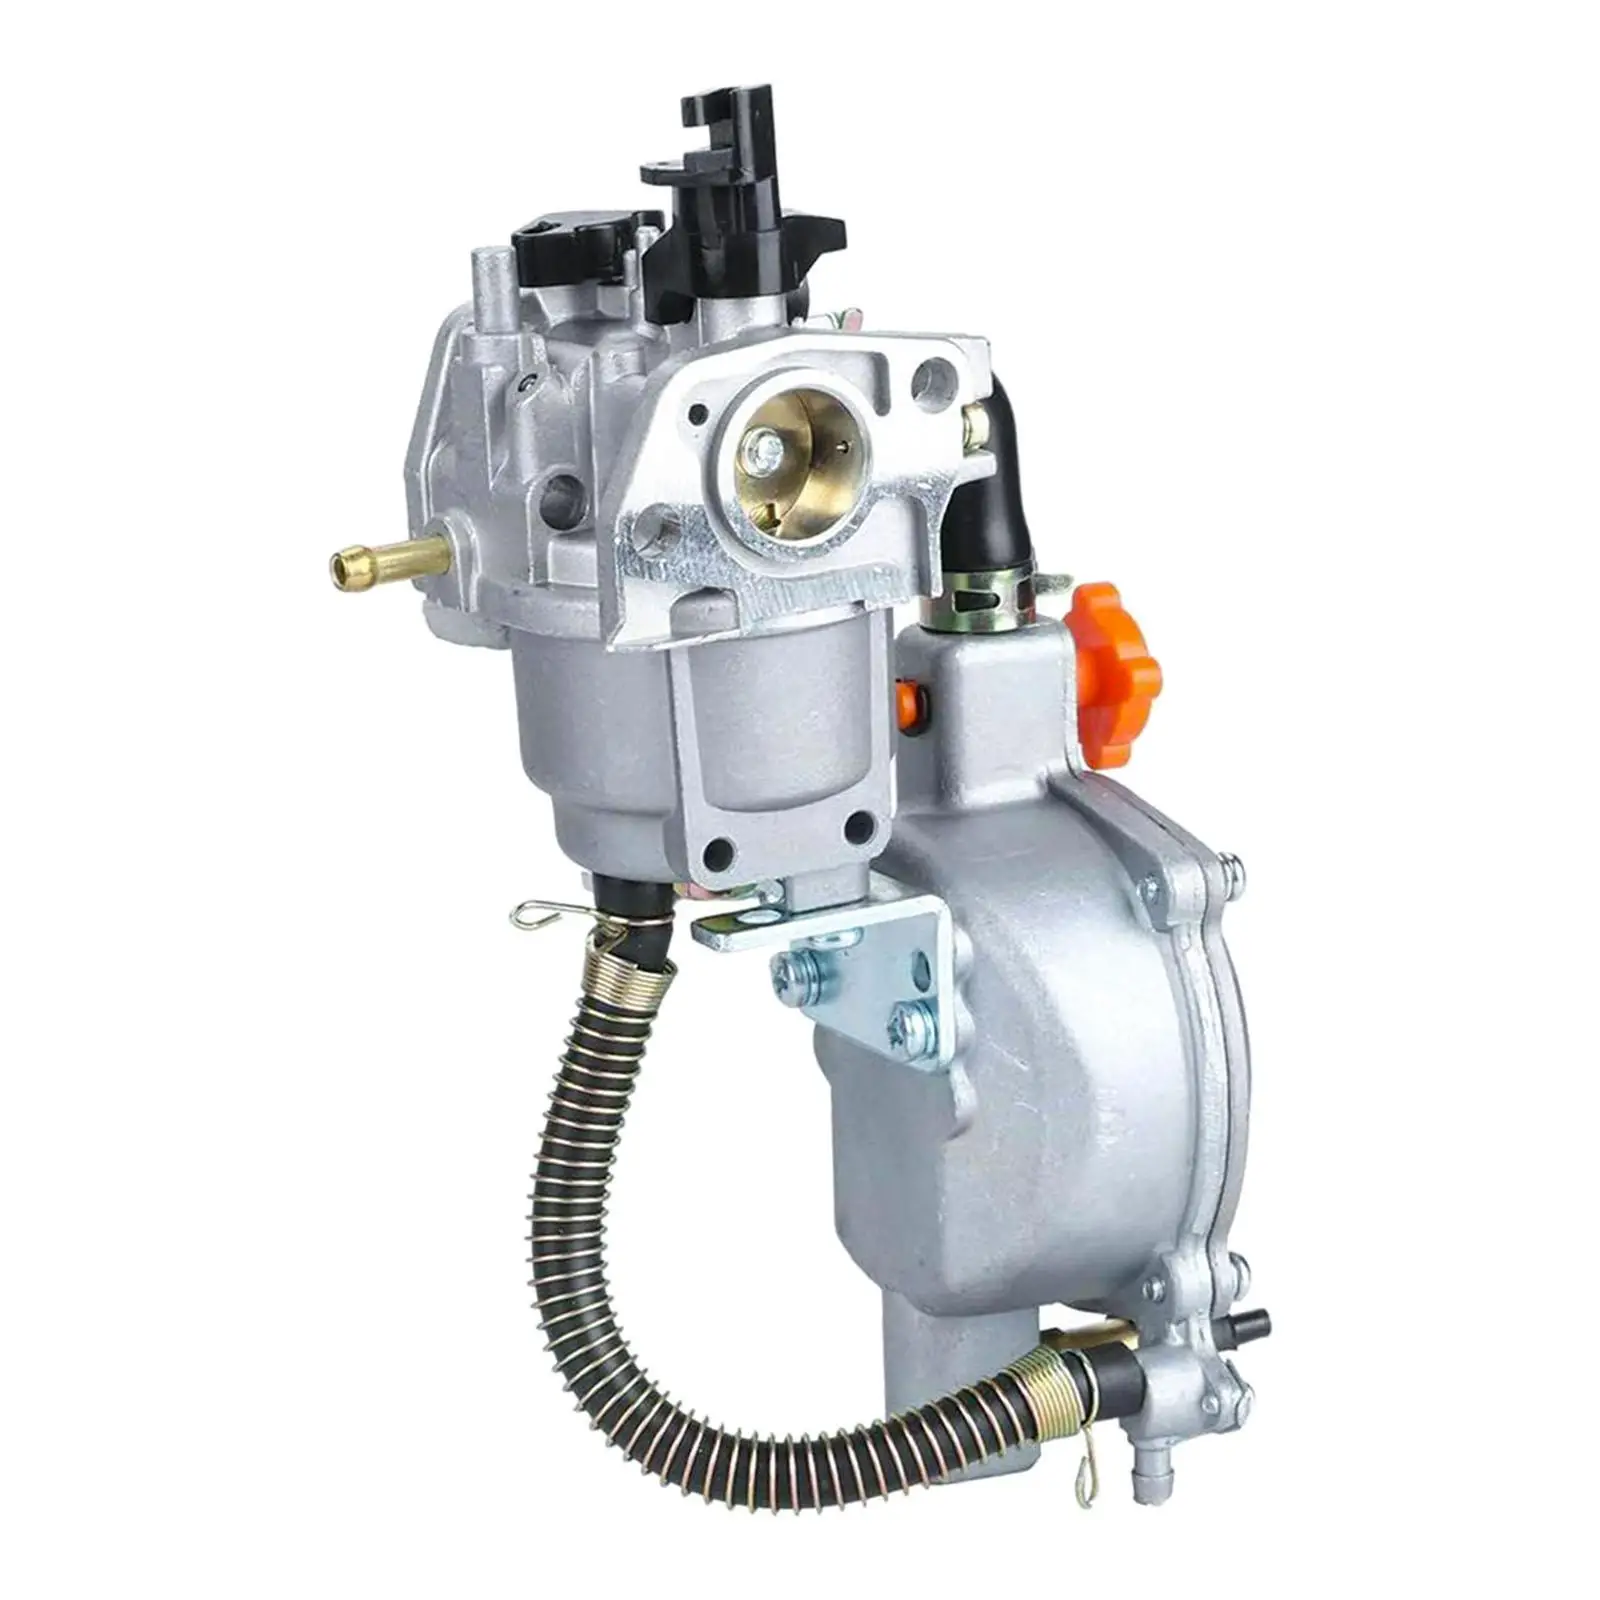 Dual Fuel Carburetor Kit Spare Parts Accessory Professional Easy to Install Portable Lpg Ng Conversion for 168F